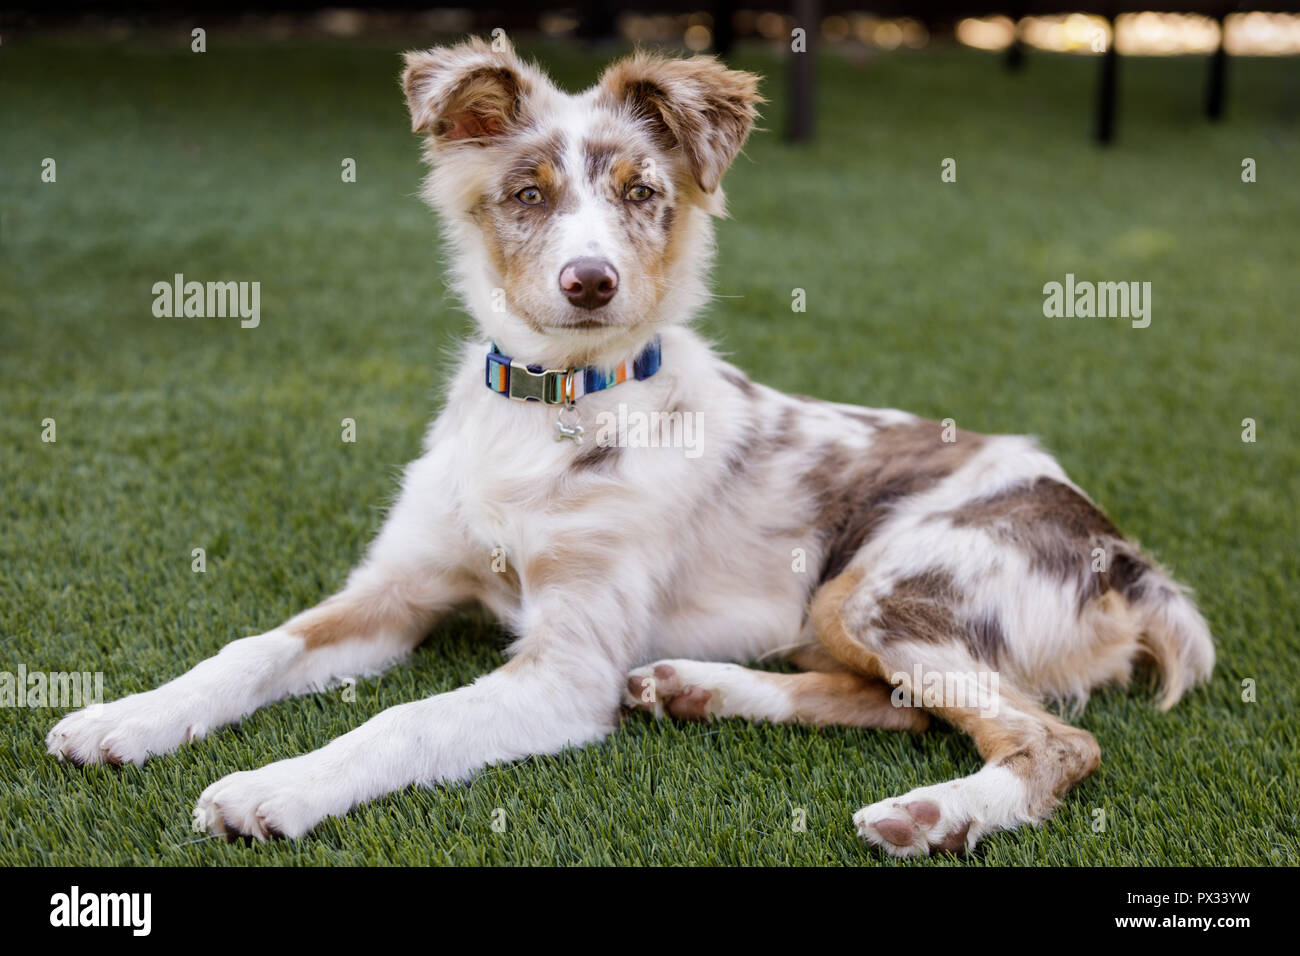 Red Merle Australian Shepherd Puppy lying down and looking at camera. Stock Photo